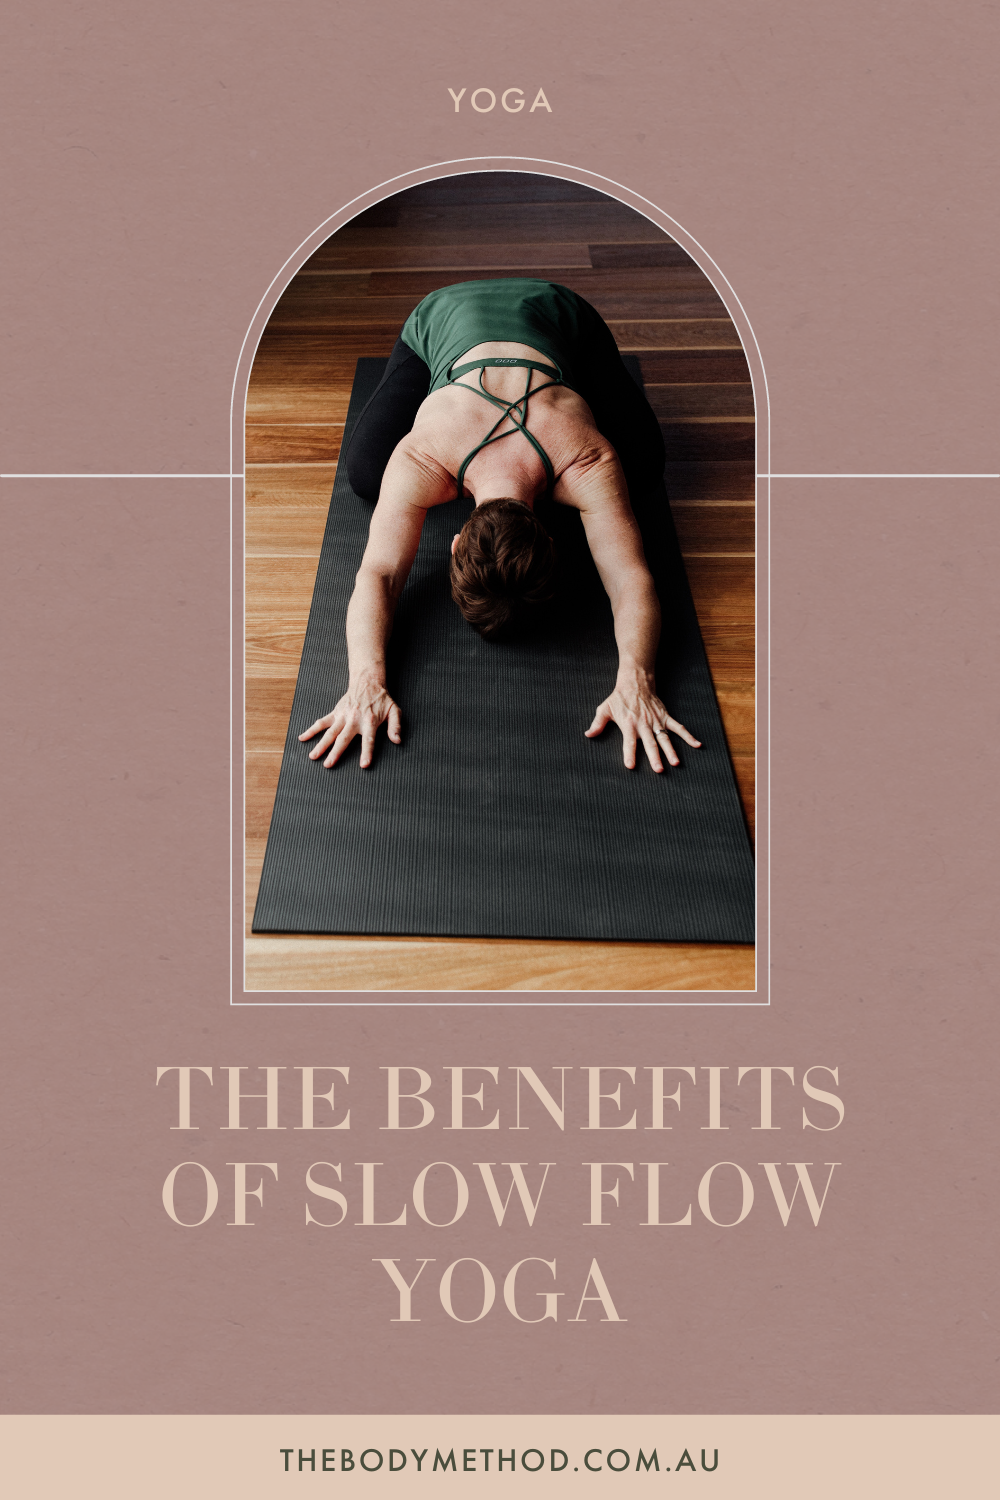 The Body Method — The Benefits of Slow Flow Yoga for Improved